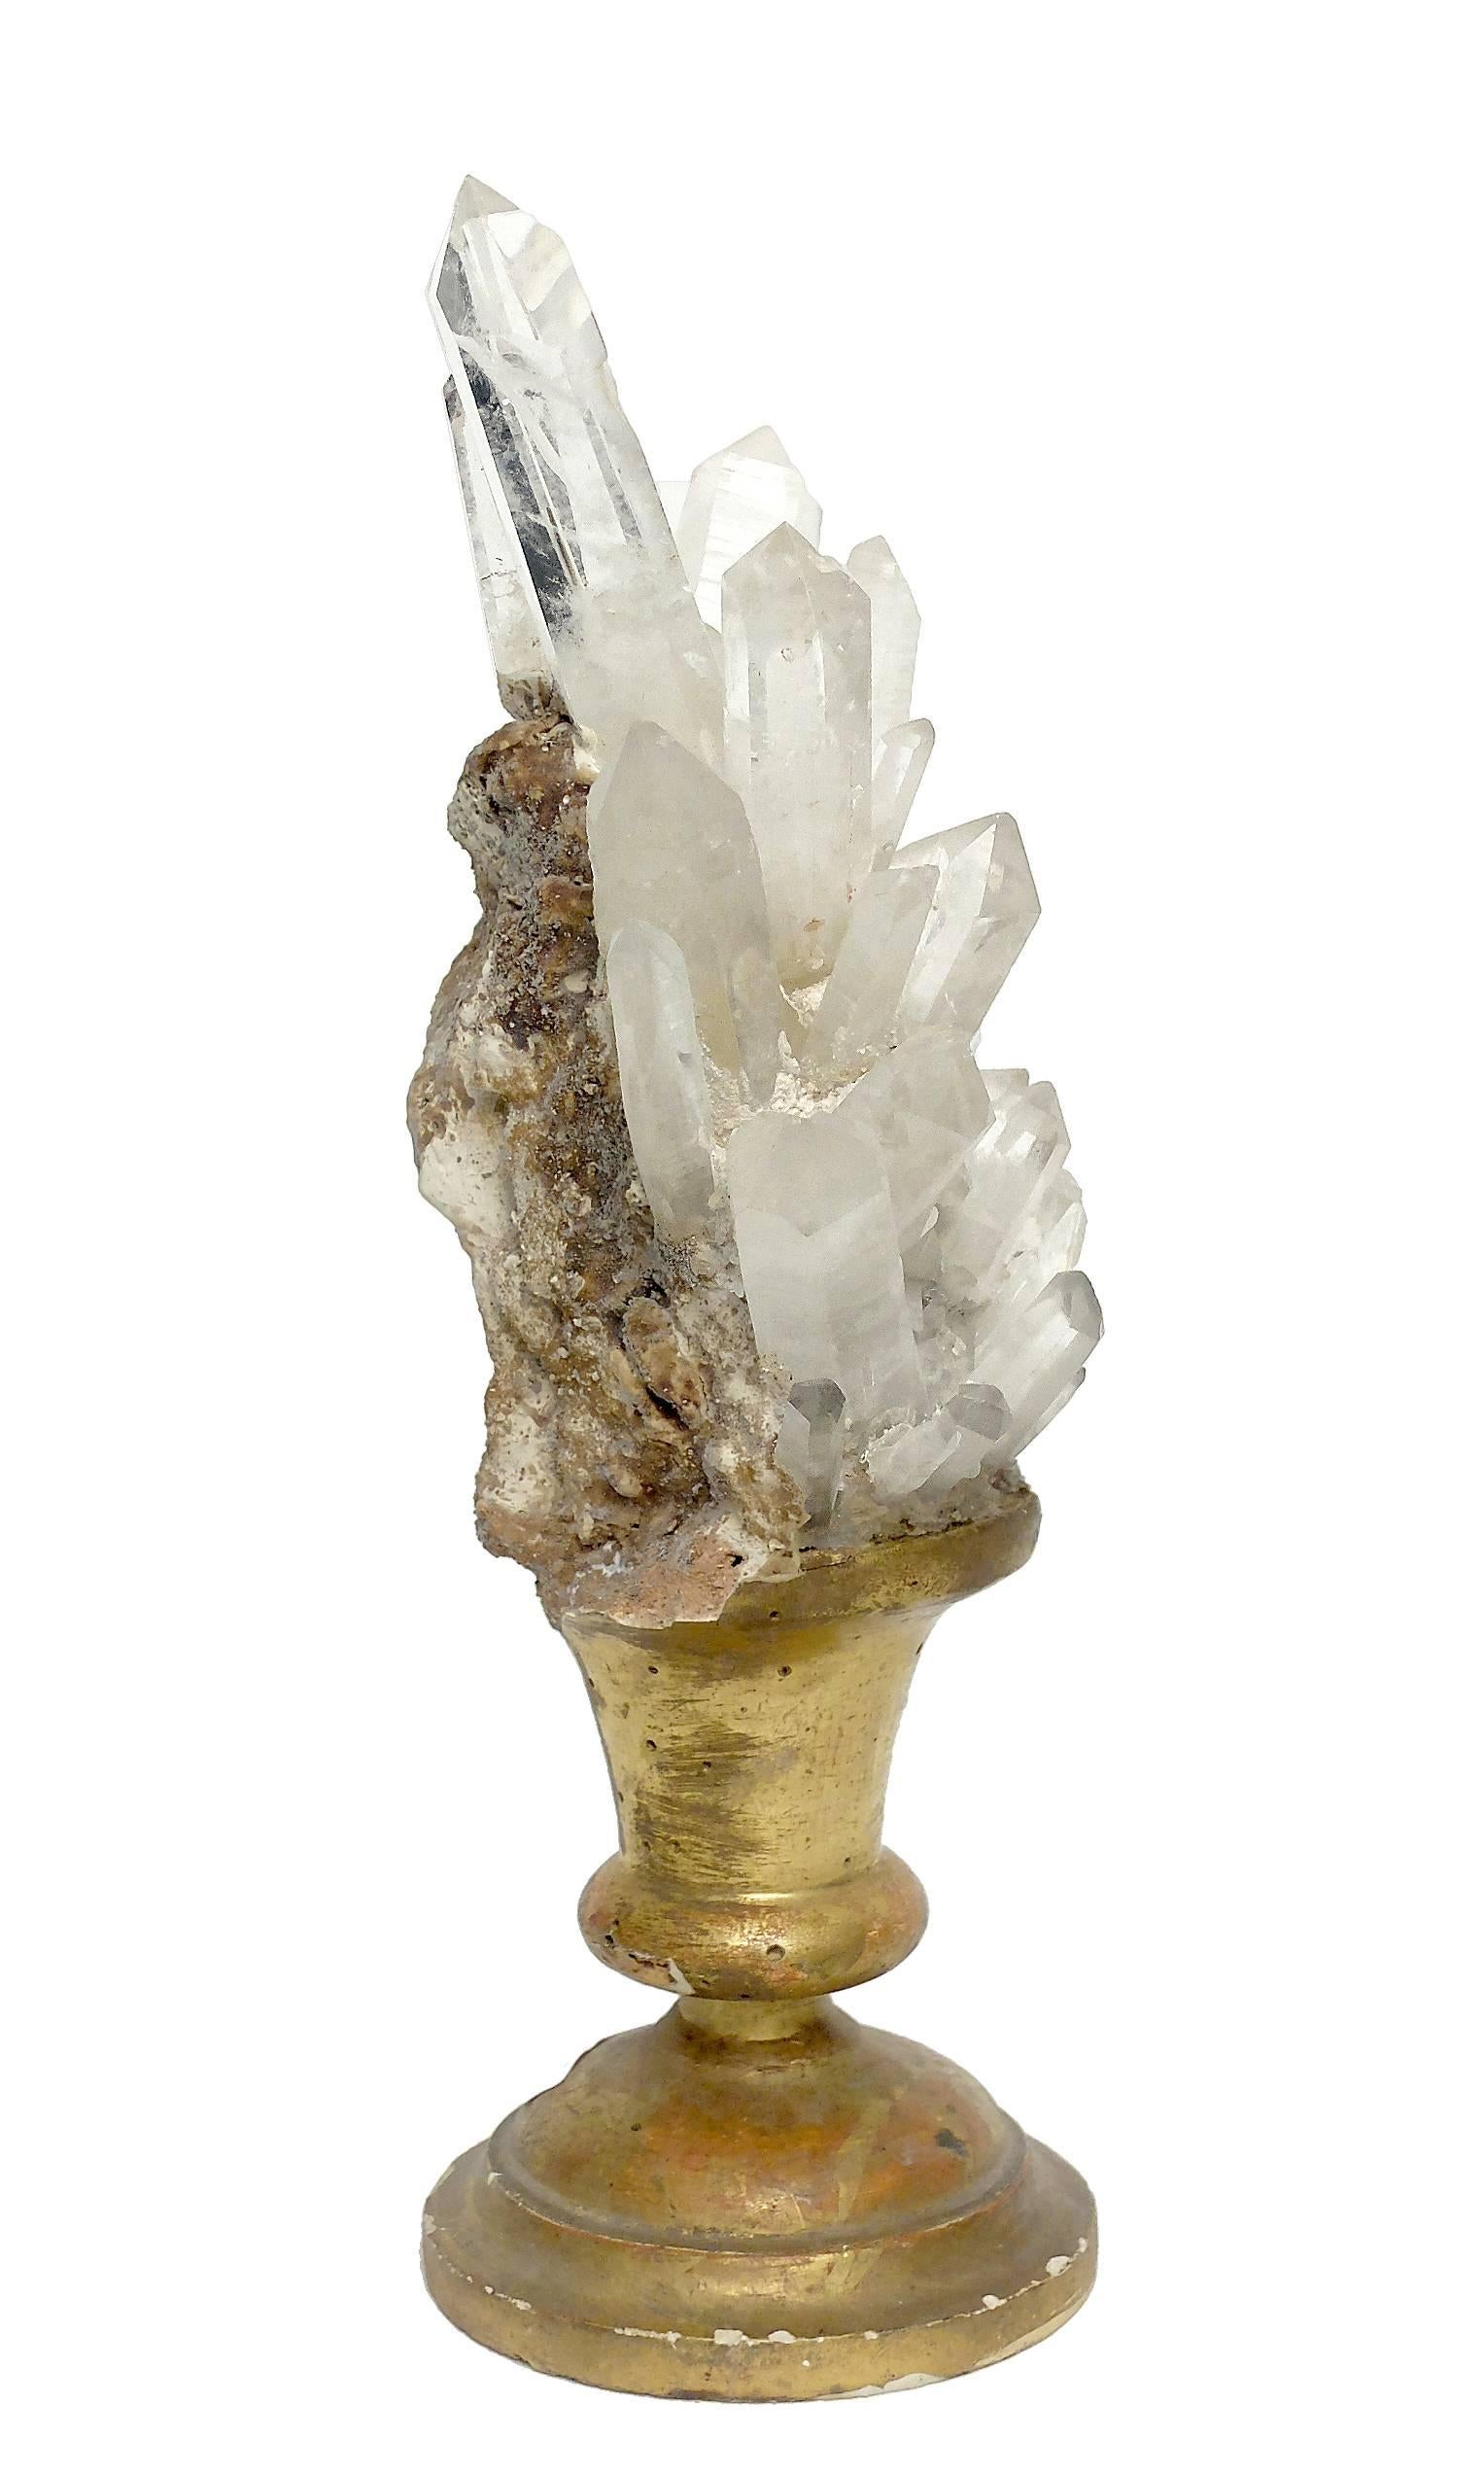 A Naturalia mineral specimen a rock crystals druzes, mounted over an older gold-plated wooden base in a shape of a vase.